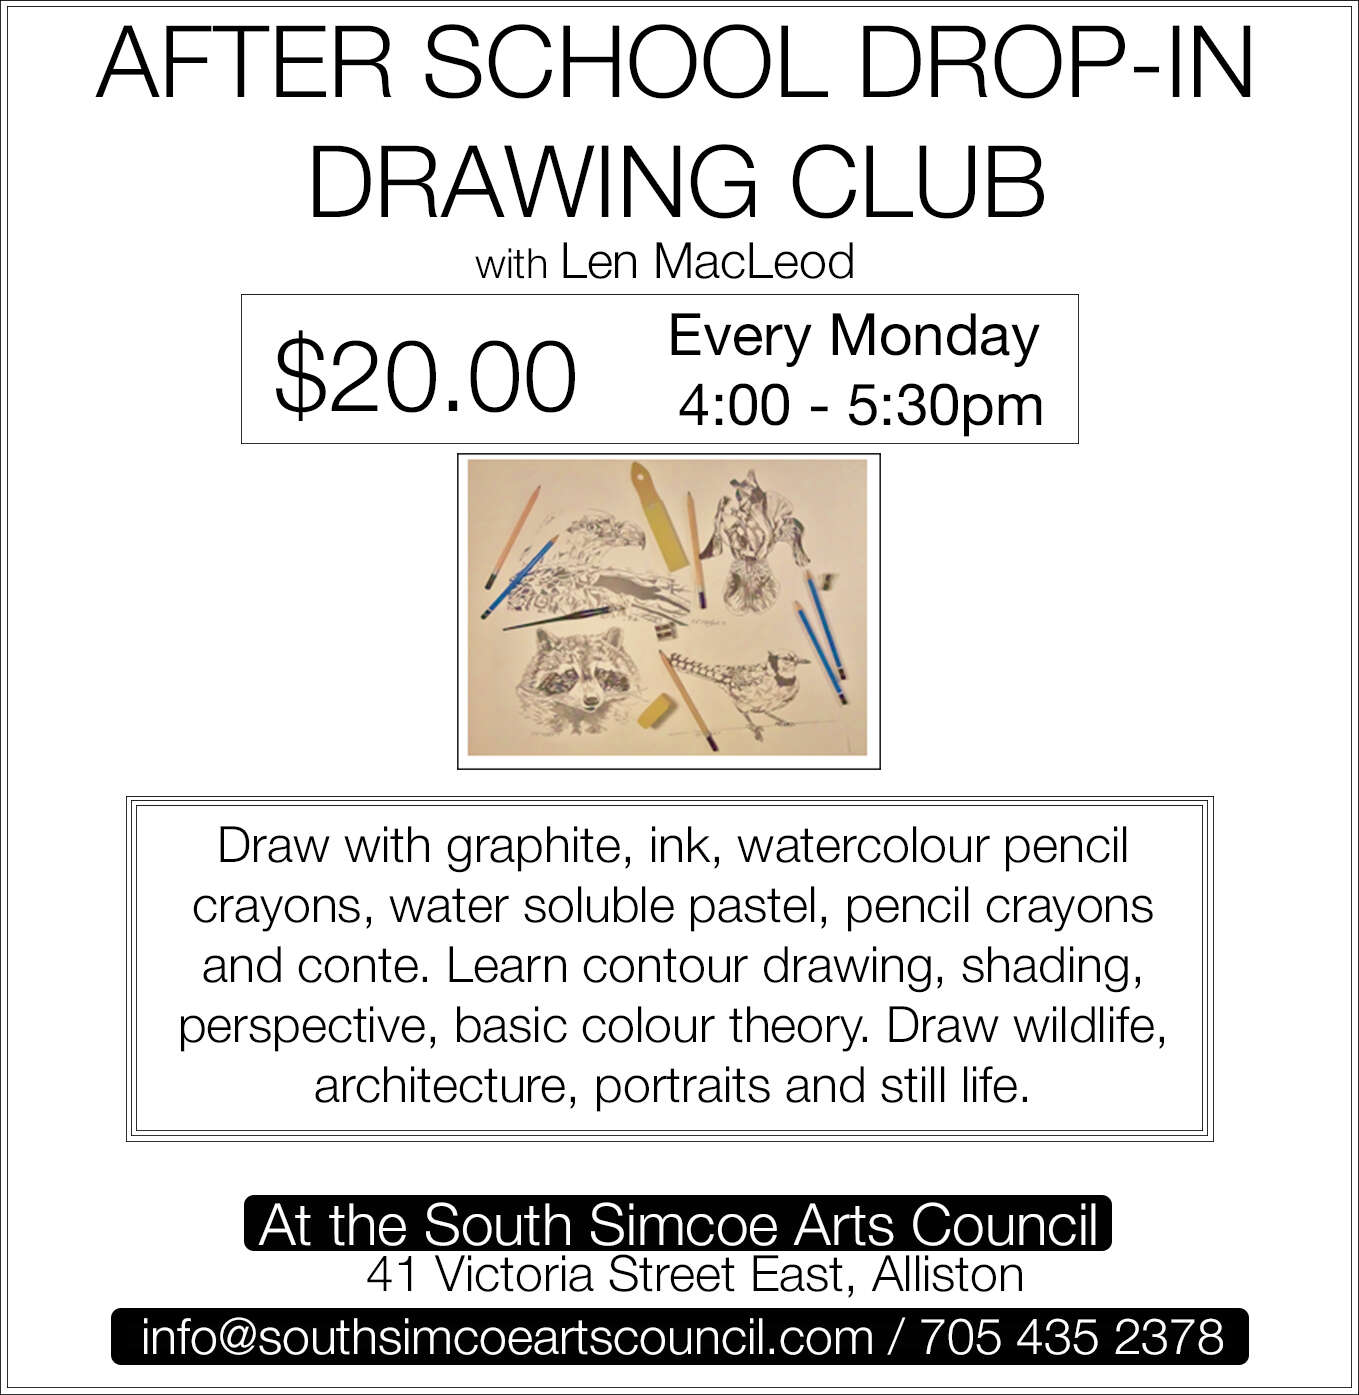 After School Drop-In Drawing Club